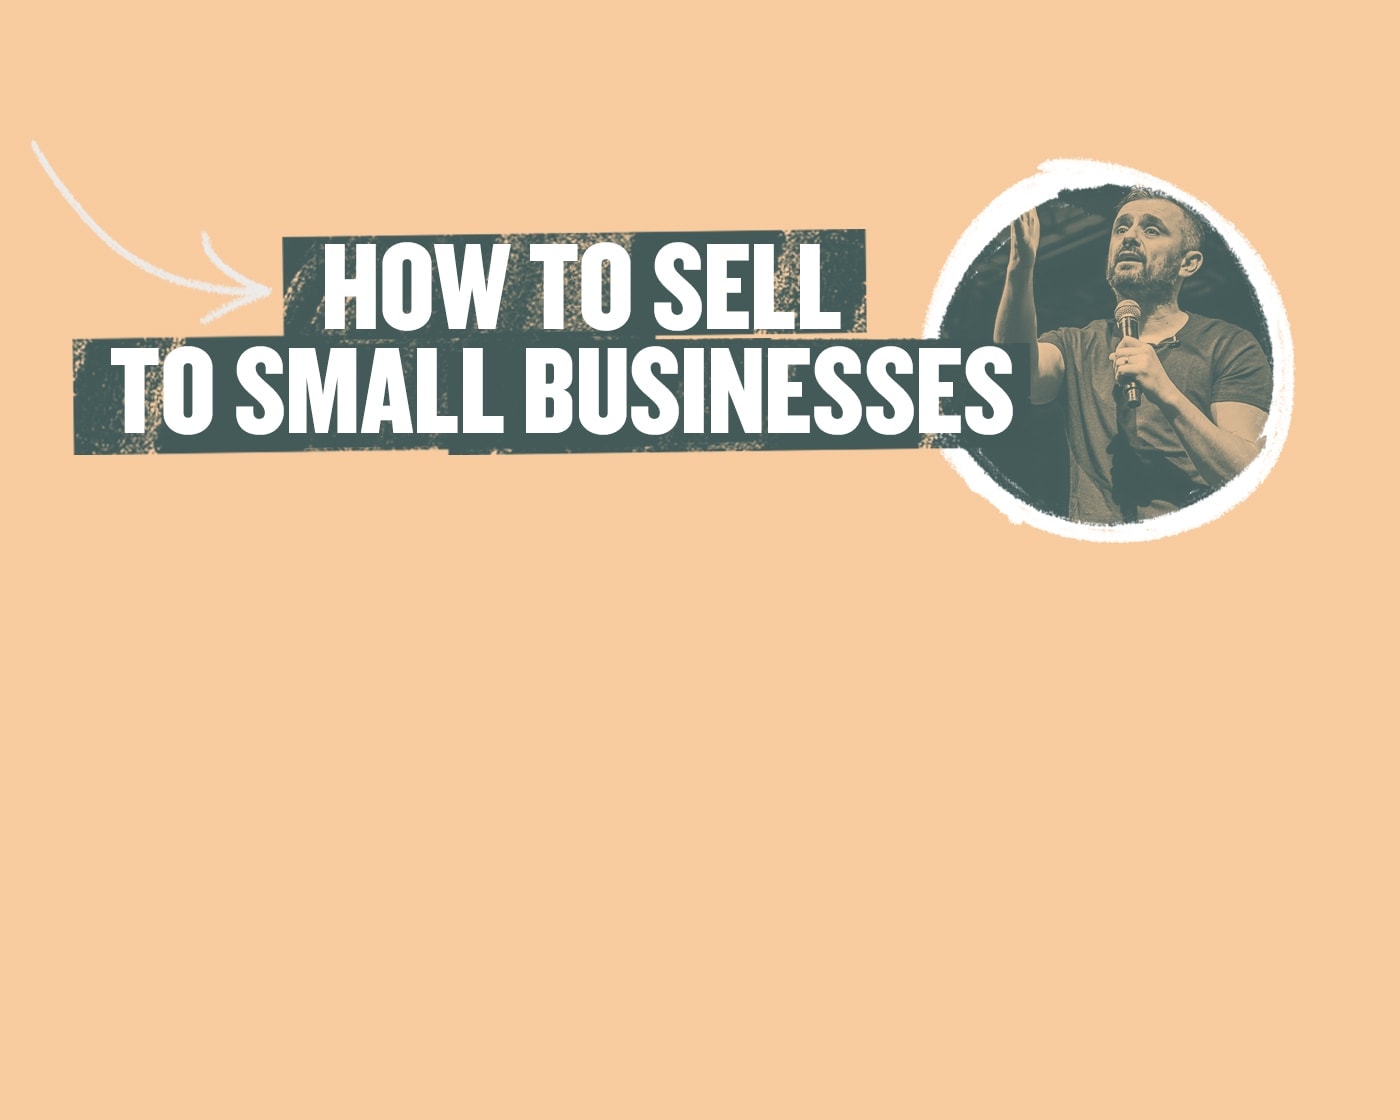 How to Sell to Small Businesses